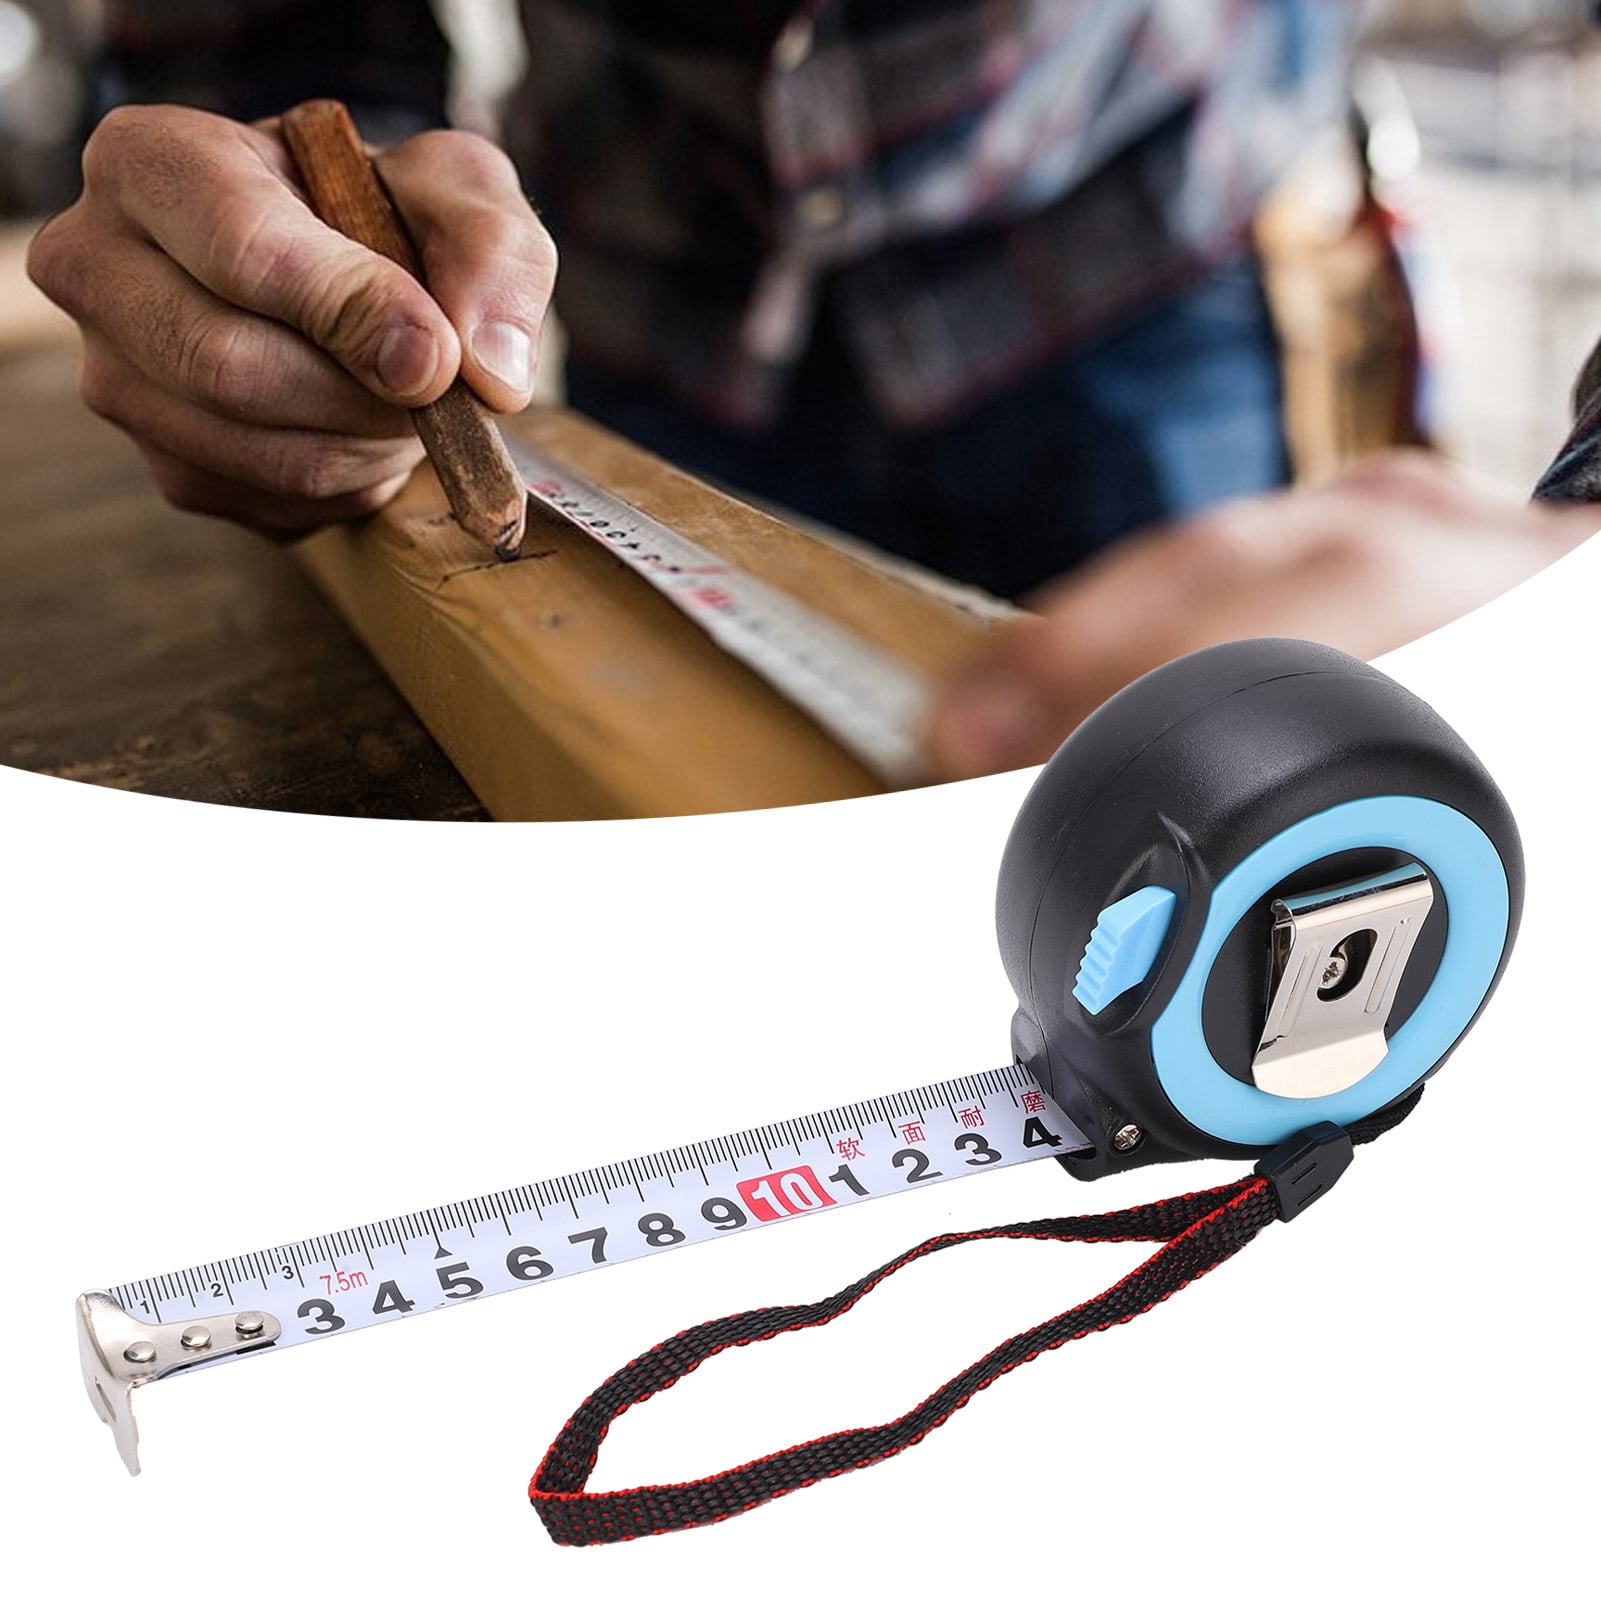 YIUS Tape Measure Steel Blade Thicker Upgrade Self‑Locking Frosted Surface for Woodworking